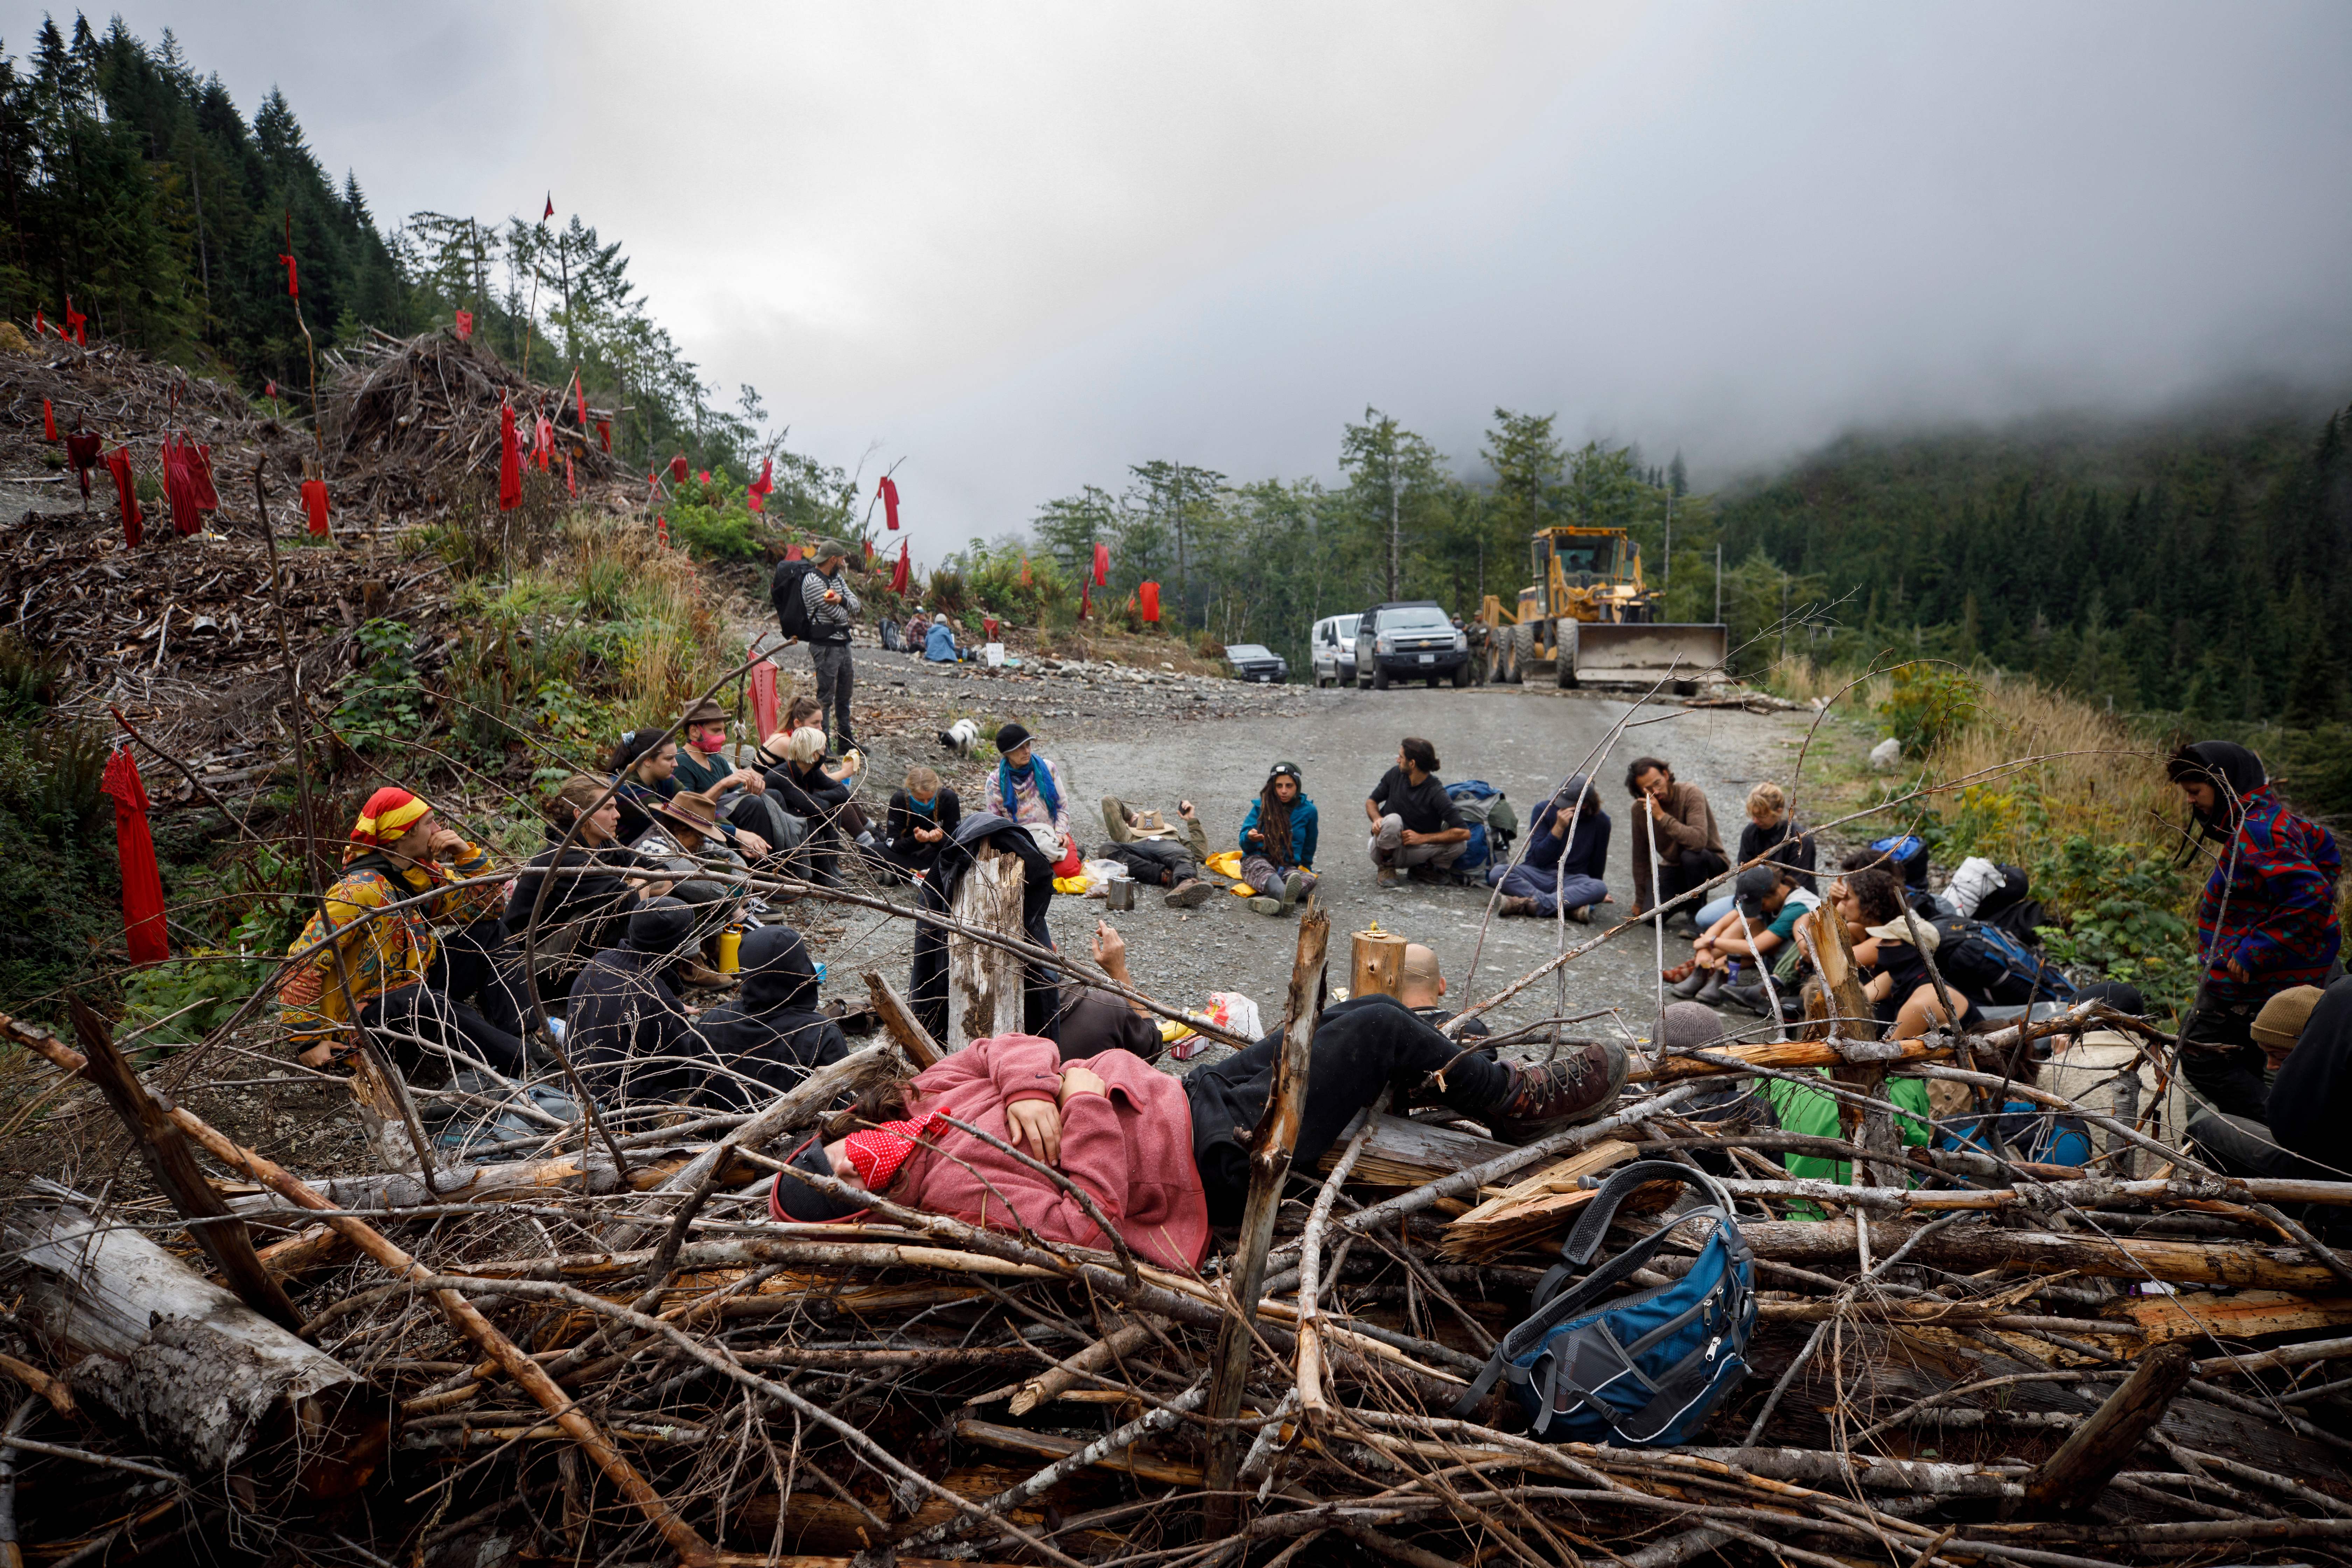 Protestors sit in front of downed trees used as a road block at a protest camp for the Fairy Creek anti-old growth logging blockade, 18kms (11 miles) northeast of Port Renfrew on Vancouver Island, Canada, on 6 September 2021